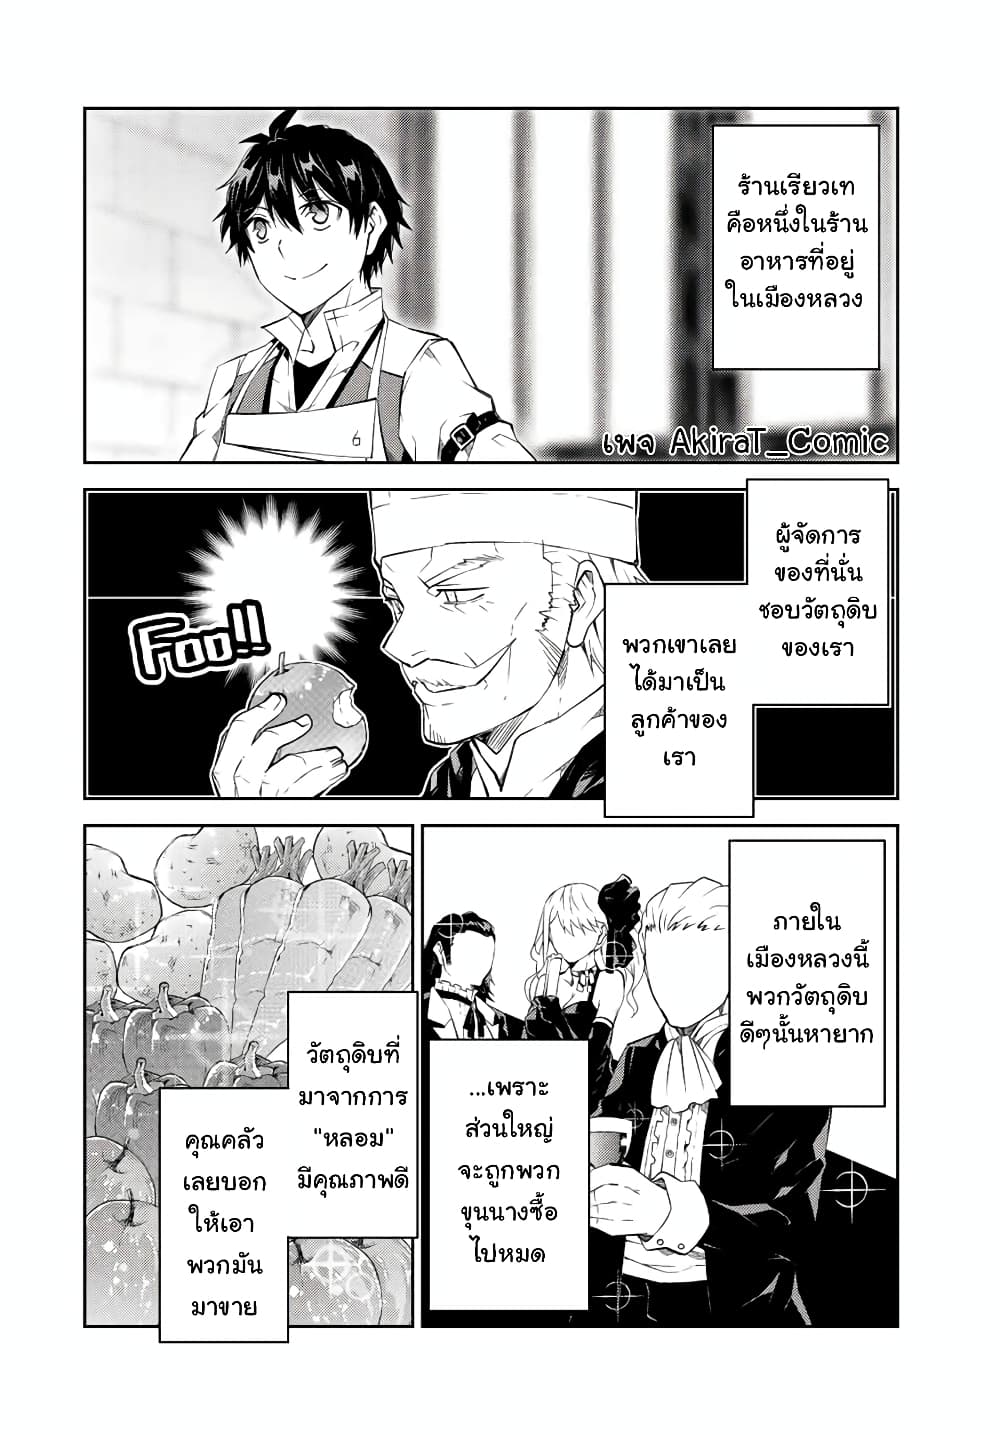 The Weakest Occupation "Blacksmith", but It's Actually the Strongest ช่างตีเหล็กอาชีพกระจอก? 81-81